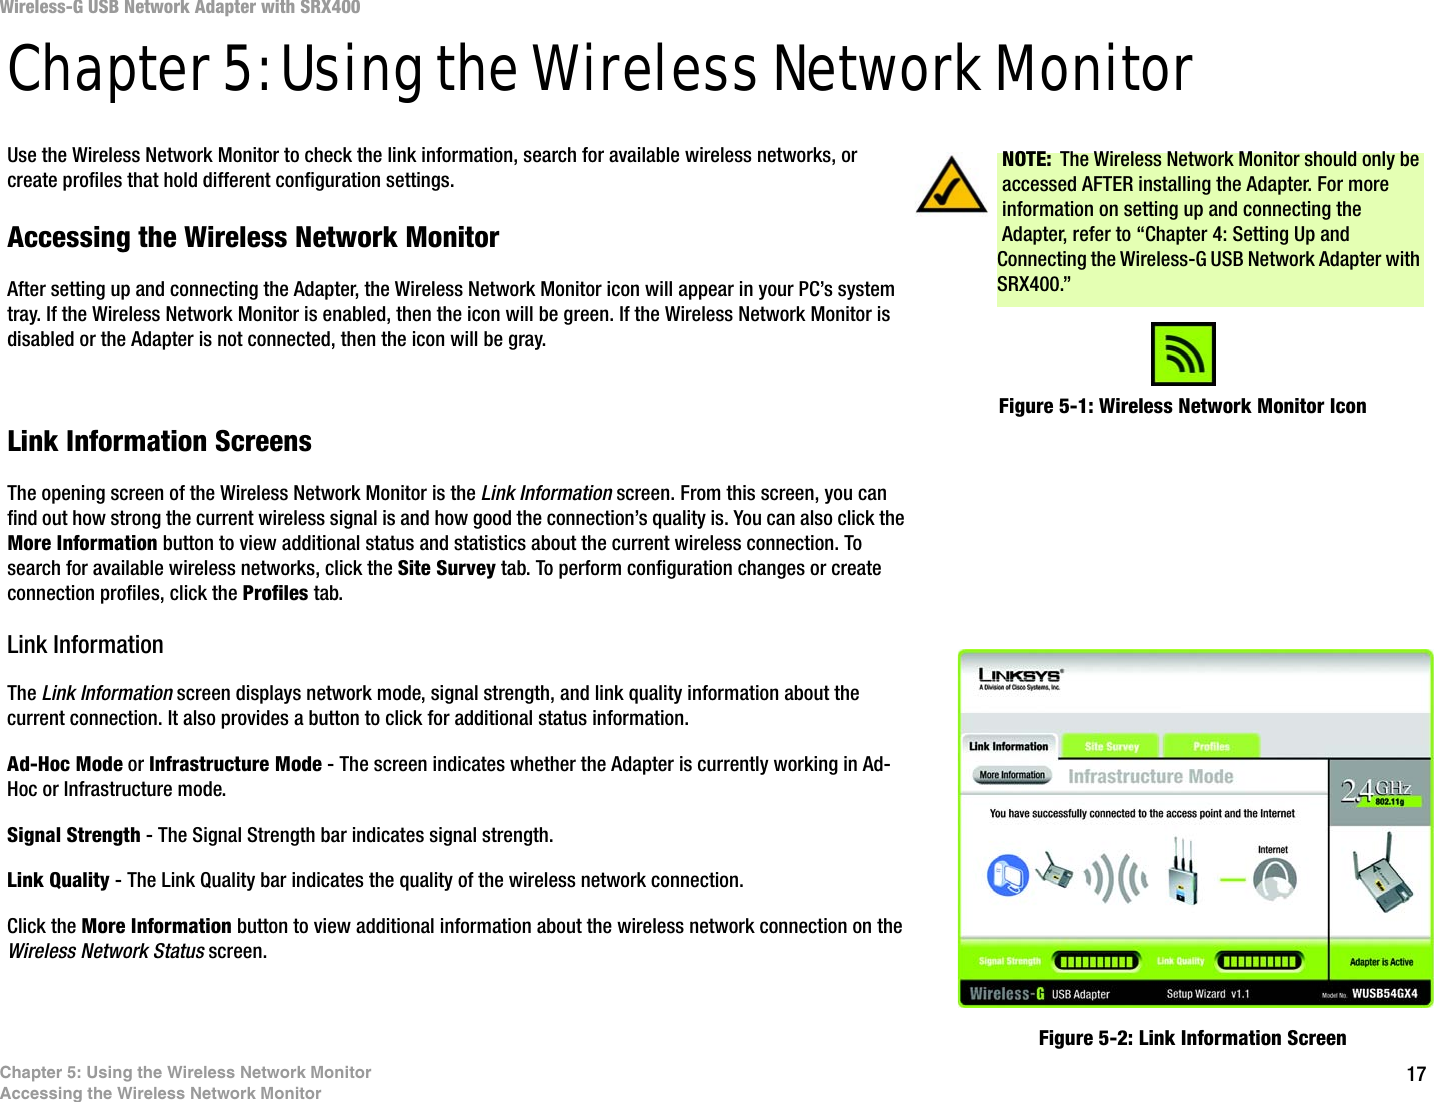 17Chapter 5: Using the Wireless Network MonitorAccessing the Wireless Network MonitorWireless-G USB Network Adapter with SRX400Chapter 5: Using the Wireless Network MonitorUse the Wireless Network Monitor to check the link information, search for available wireless networks, or create profiles that hold different configuration settings.Accessing the Wireless Network MonitorAfter setting up and connecting the Adapter, the Wireless Network Monitor icon will appear in your PC’s system tray. If the Wireless Network Monitor is enabled, then the icon will be green. If the Wireless Network Monitor is disabled or the Adapter is not connected, then the icon will be gray.Link Information ScreensThe opening screen of the Wireless Network Monitor is the Link Information screen. From this screen, you can find out how strong the current wireless signal is and how good the connection’s quality is. You can also click the More Information button to view additional status and statistics about the current wireless connection. To search for available wireless networks, click the Site Survey tab. To perform configuration changes or create connection profiles, click the Profiles tab.Link InformationThe Link Information screen displays network mode, signal strength, and link quality information about the current connection. It also provides a button to click for additional status information.Ad-Hoc Mode or Infrastructure Mode - The screen indicates whether the Adapter is currently working in Ad-Hoc or Infrastructure mode.Signal Strength - The Signal Strength bar indicates signal strength. Link Quality - The Link Quality bar indicates the quality of the wireless network connection.Click the More Information button to view additional information about the wireless network connection on the Wireless Network Status screen.Figure 5-1: Wireless Network Monitor IconFigure 5-2: Link Information ScreenNOTE: The Wireless Network Monitor should only be accessed AFTER installing the Adapter. For more information on setting up and connecting the Adapter, refer to “Chapter 4: Setting Up and Connecting the Wireless-G USB Network Adapter with SRX400.”